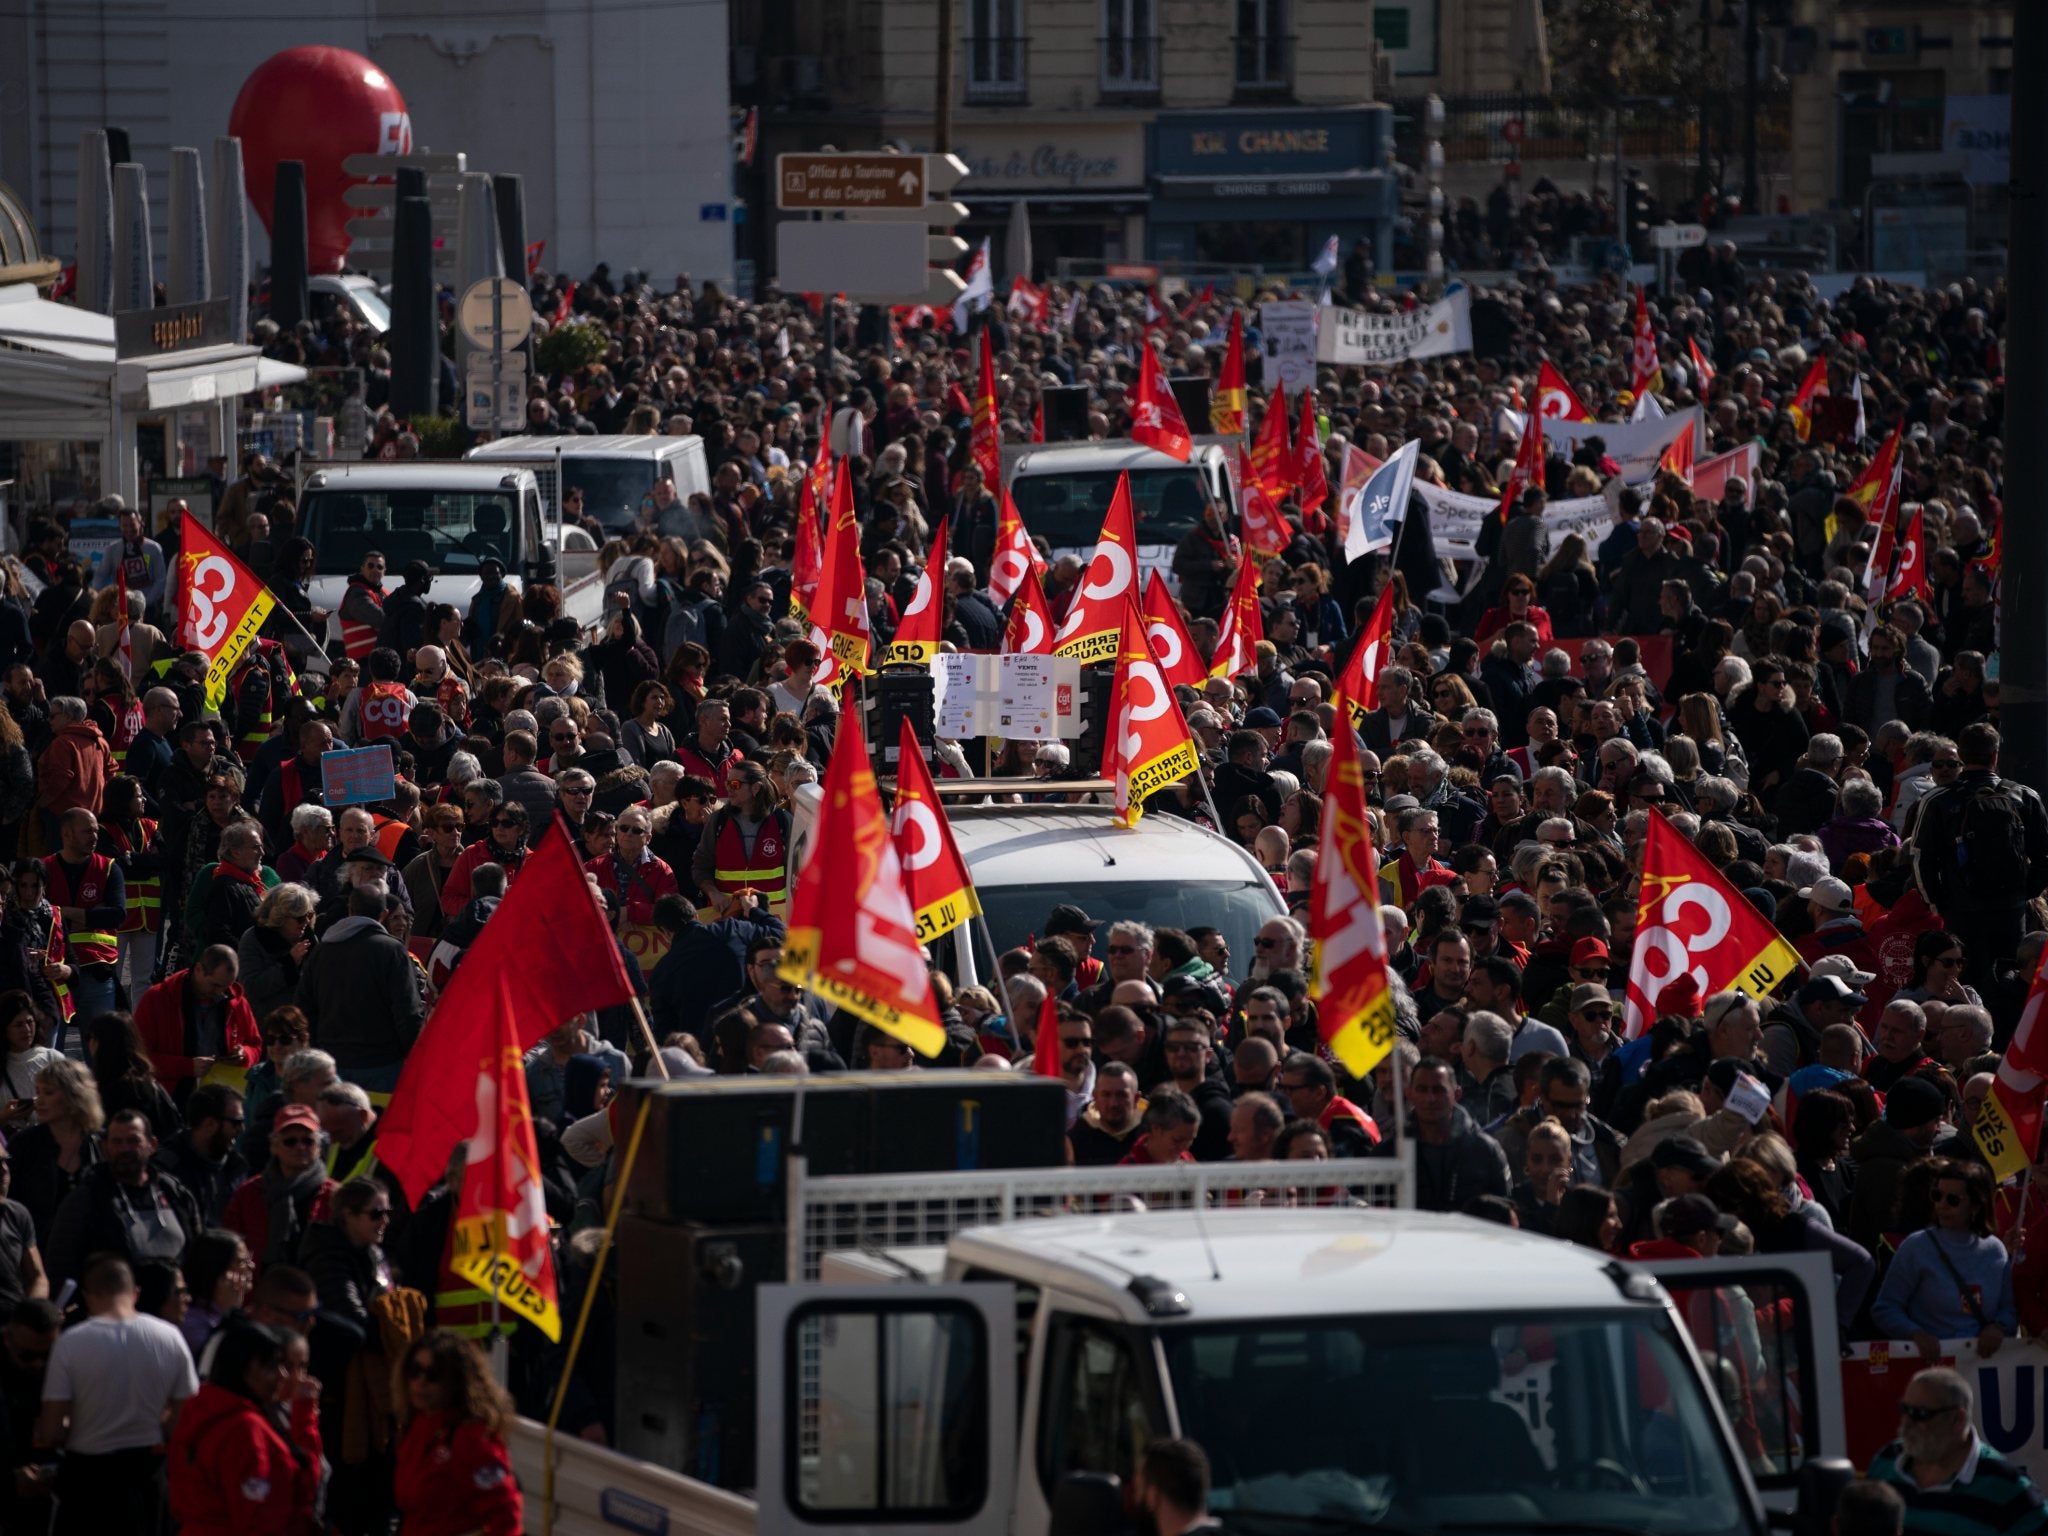 Protesters gather during a demonstration in Marseille, southern France